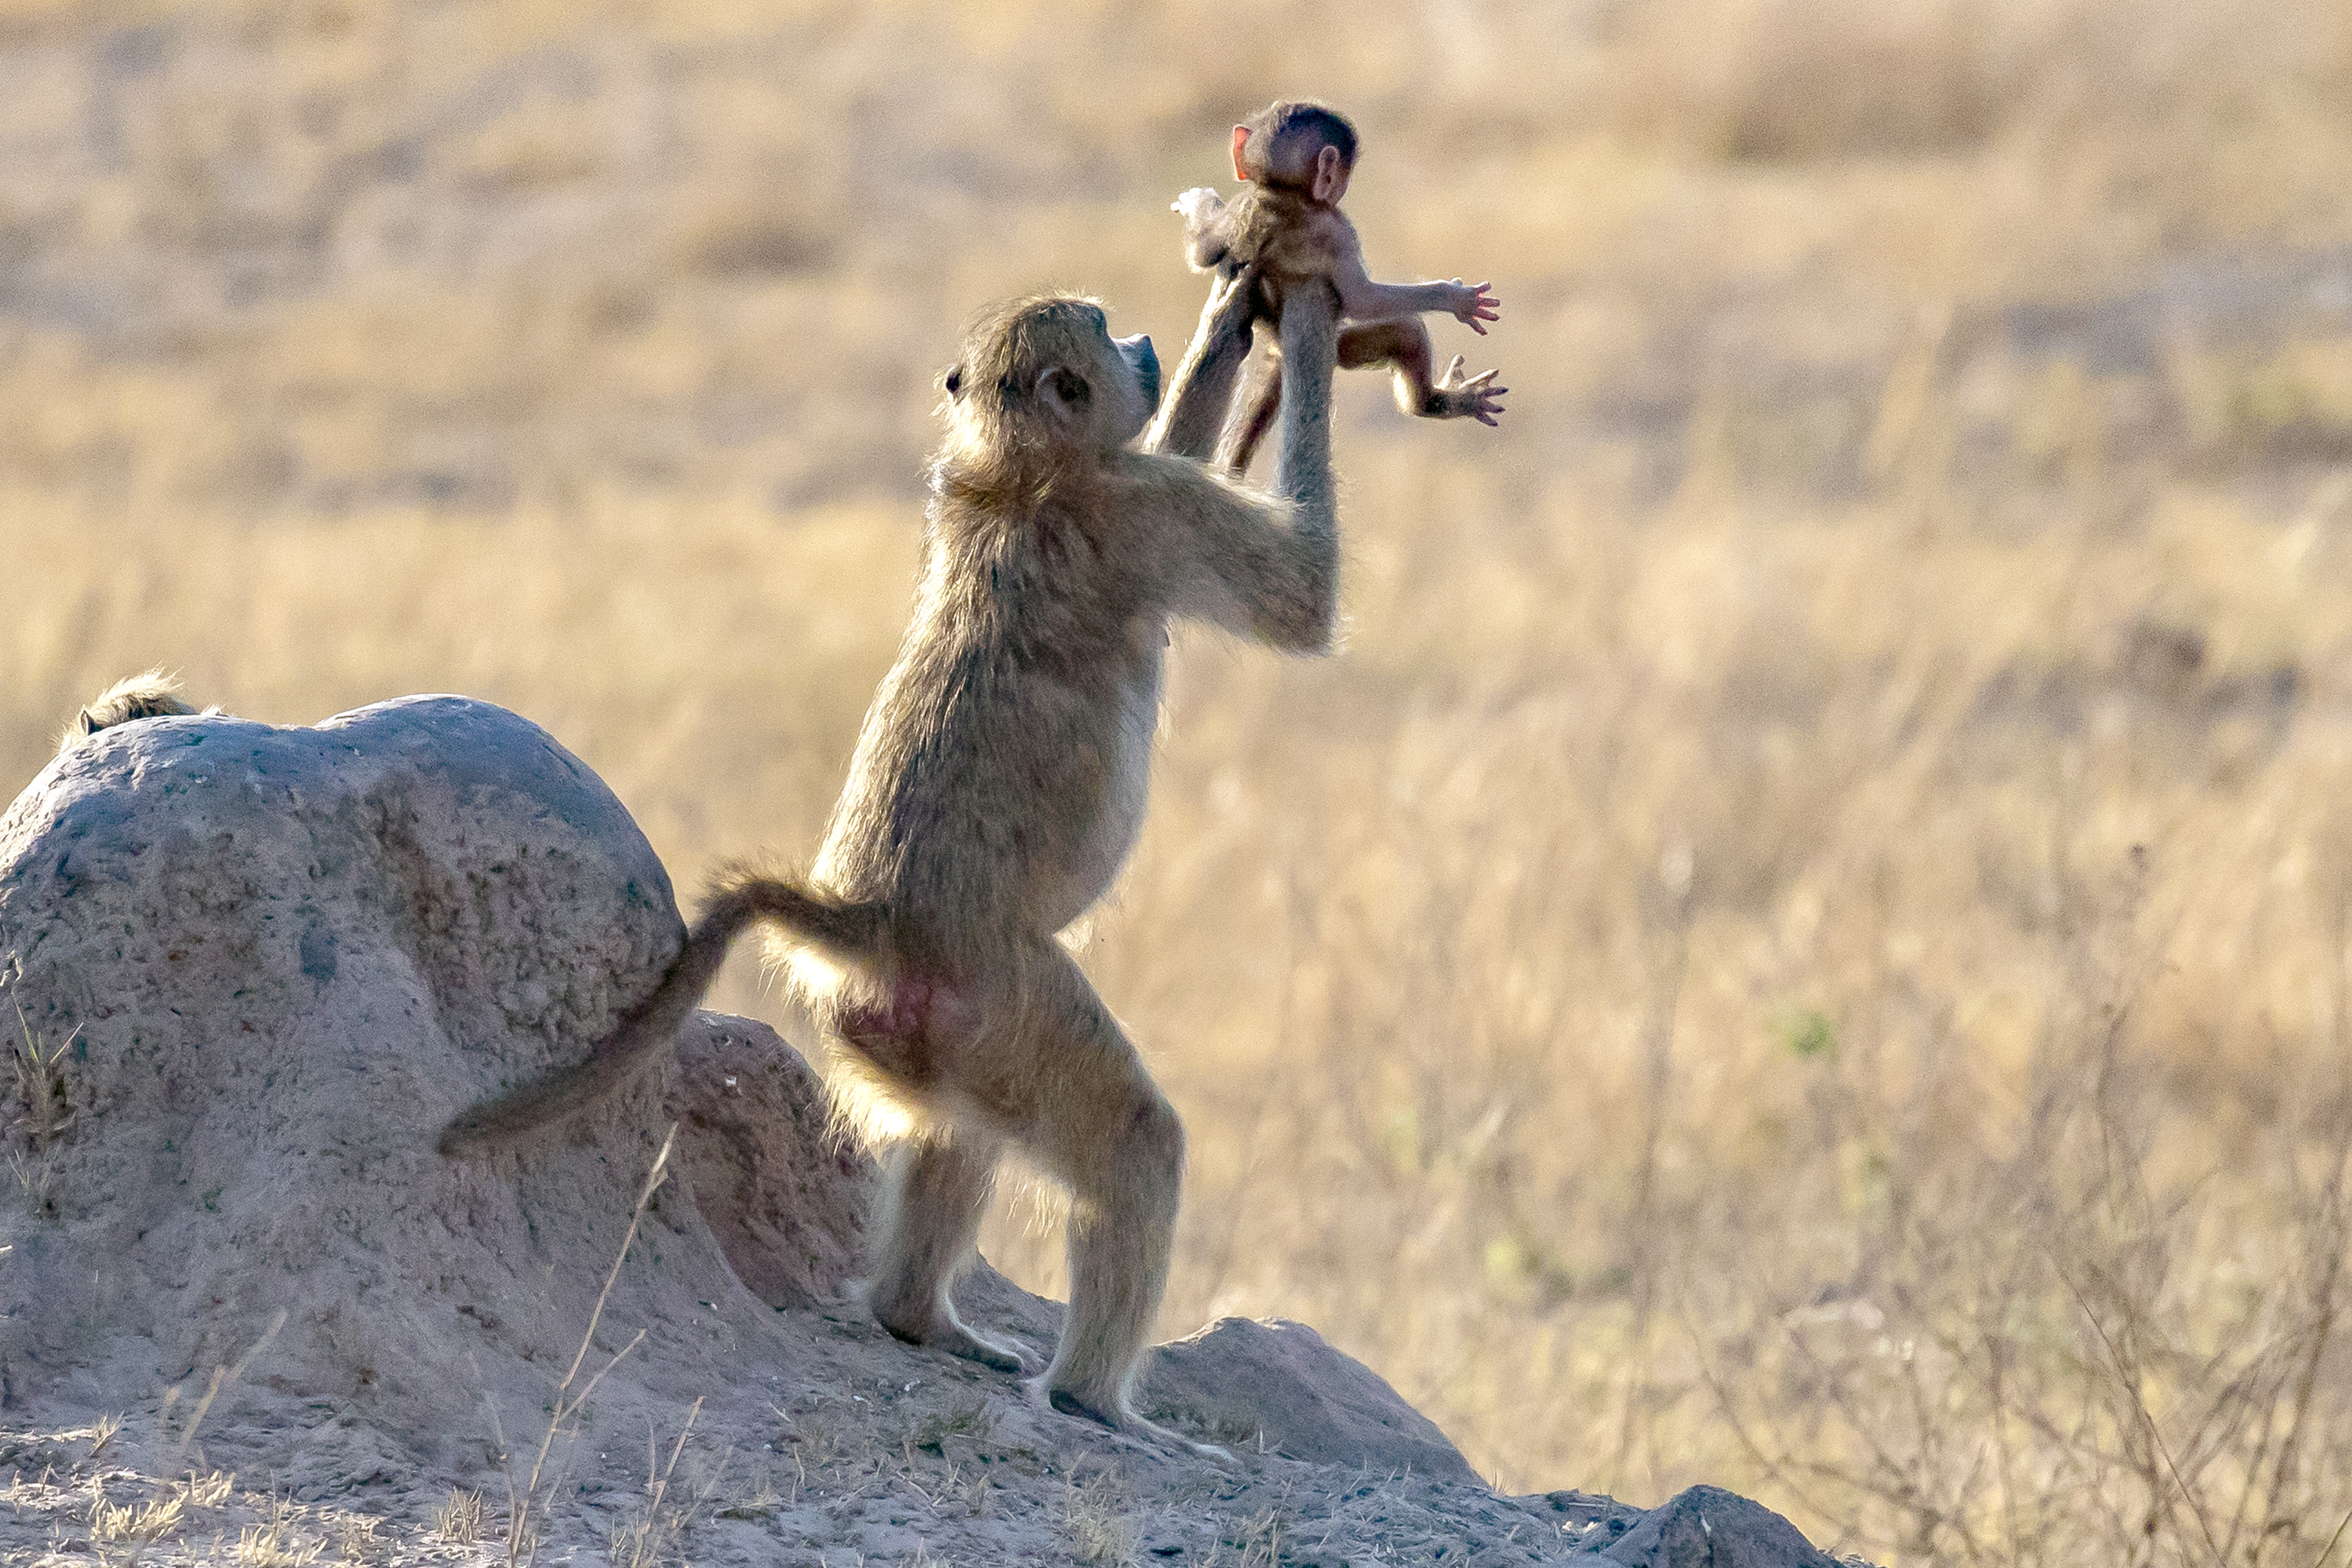 The Lion King Moment: Baboon Holds Up Baby Monkey Like Simba in the Disney  Film